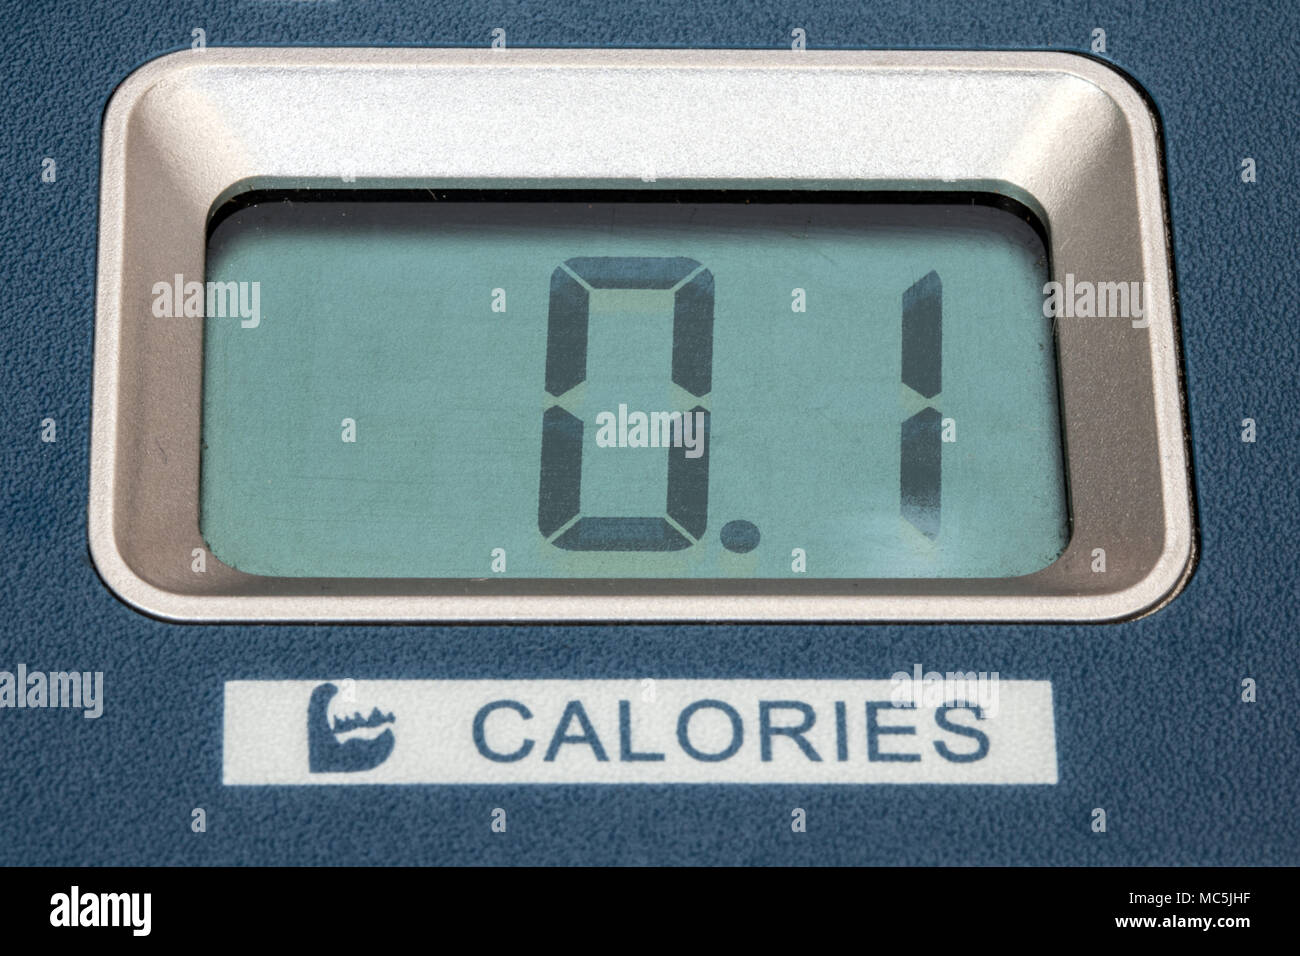 The display shows burned calories on the training machine. Stock Photo